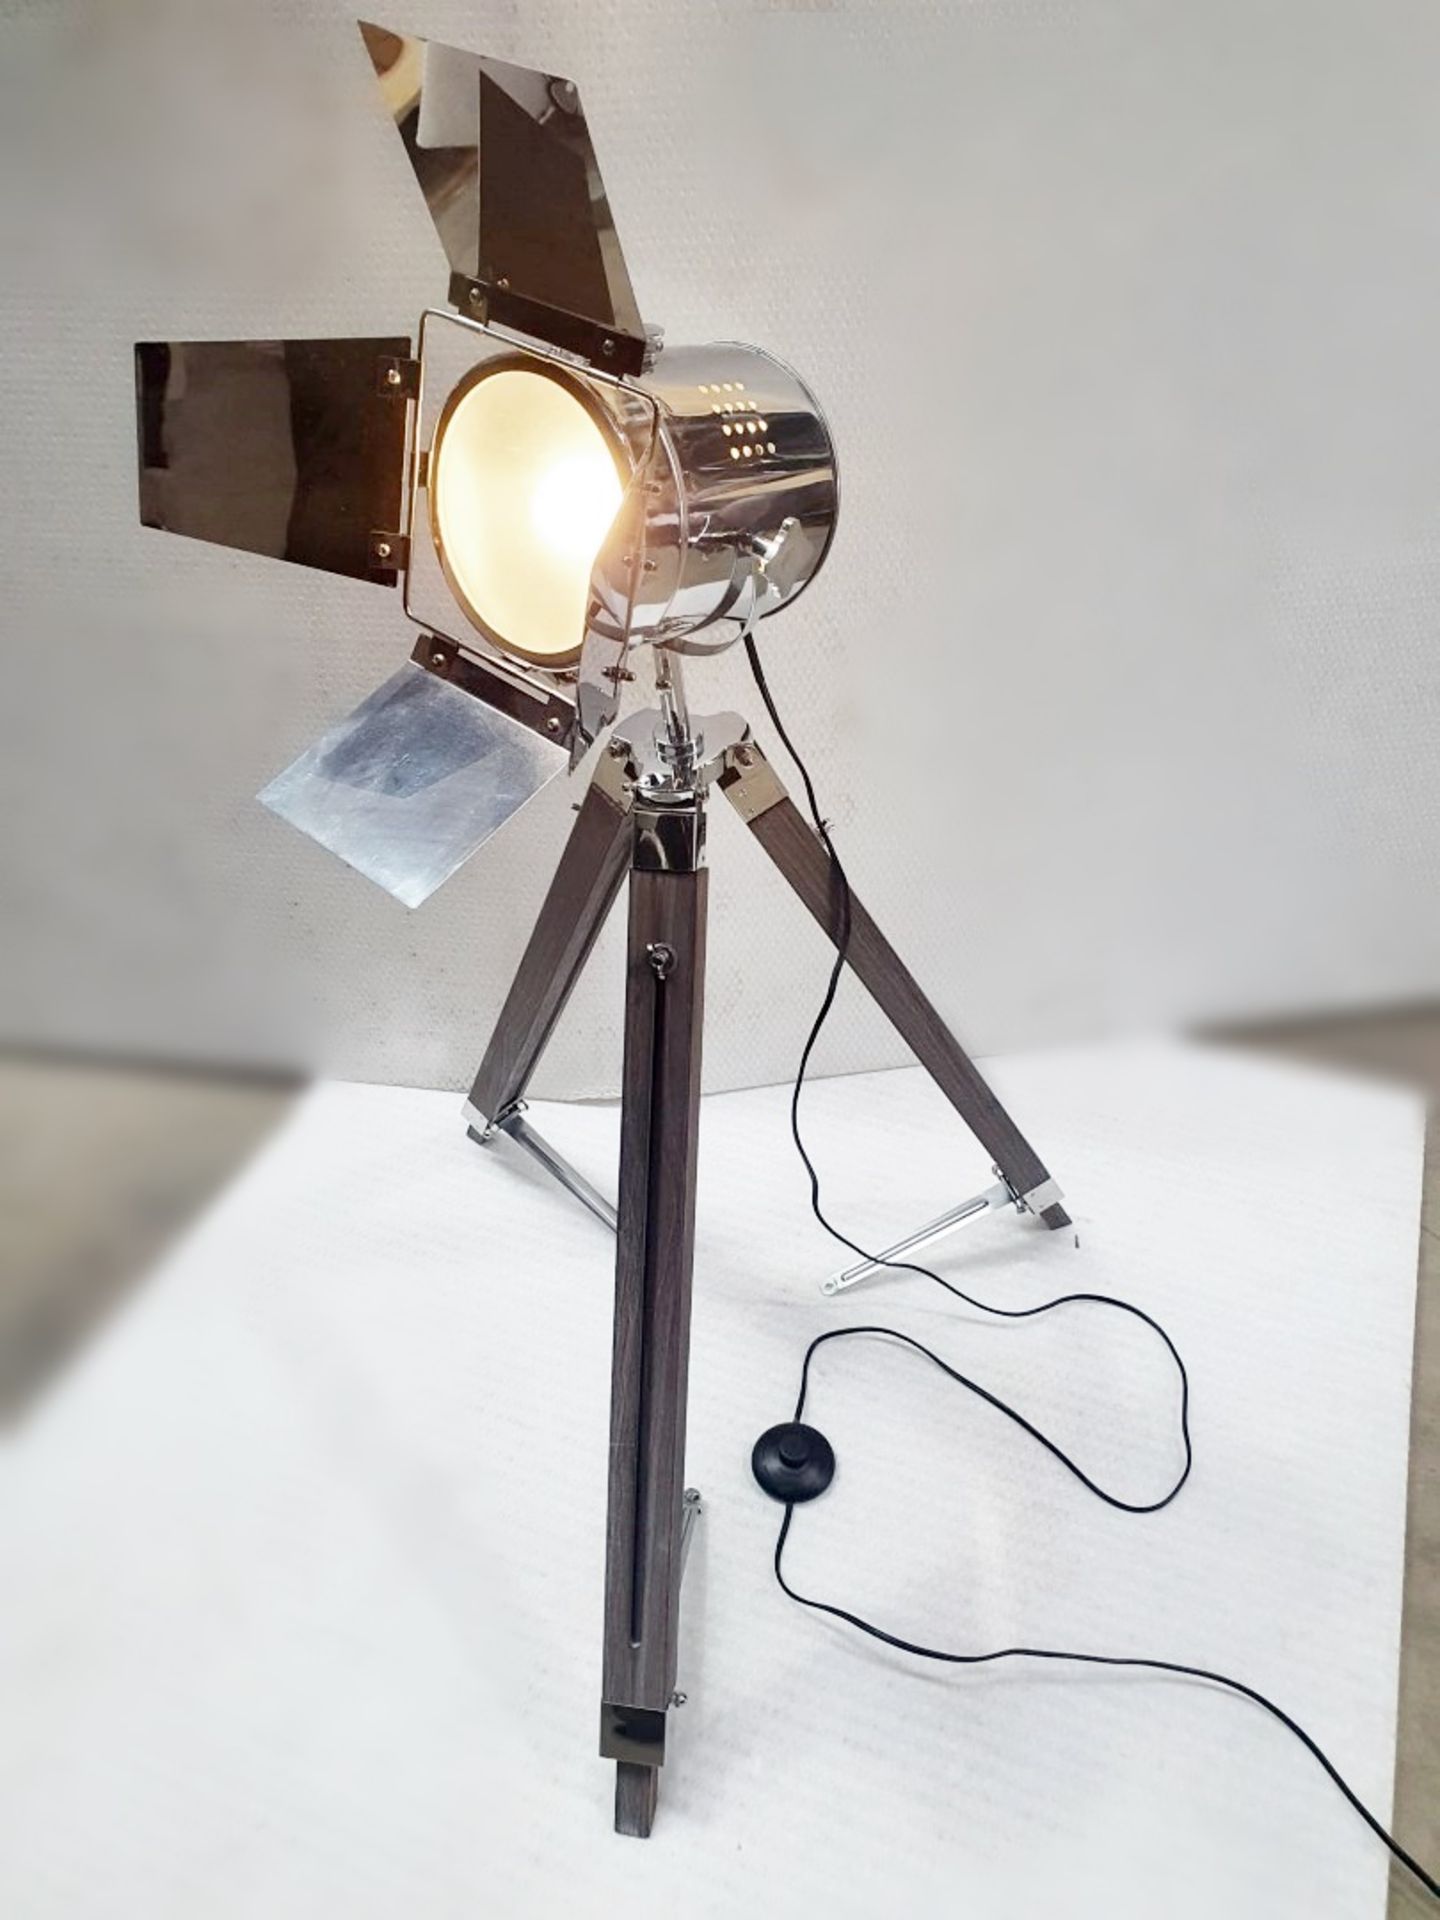 1 x Freestanding Spotlight Lamp With Wood Tripod - 90cm Tall - From An Exclusive Property - NO VAT - Image 5 of 5